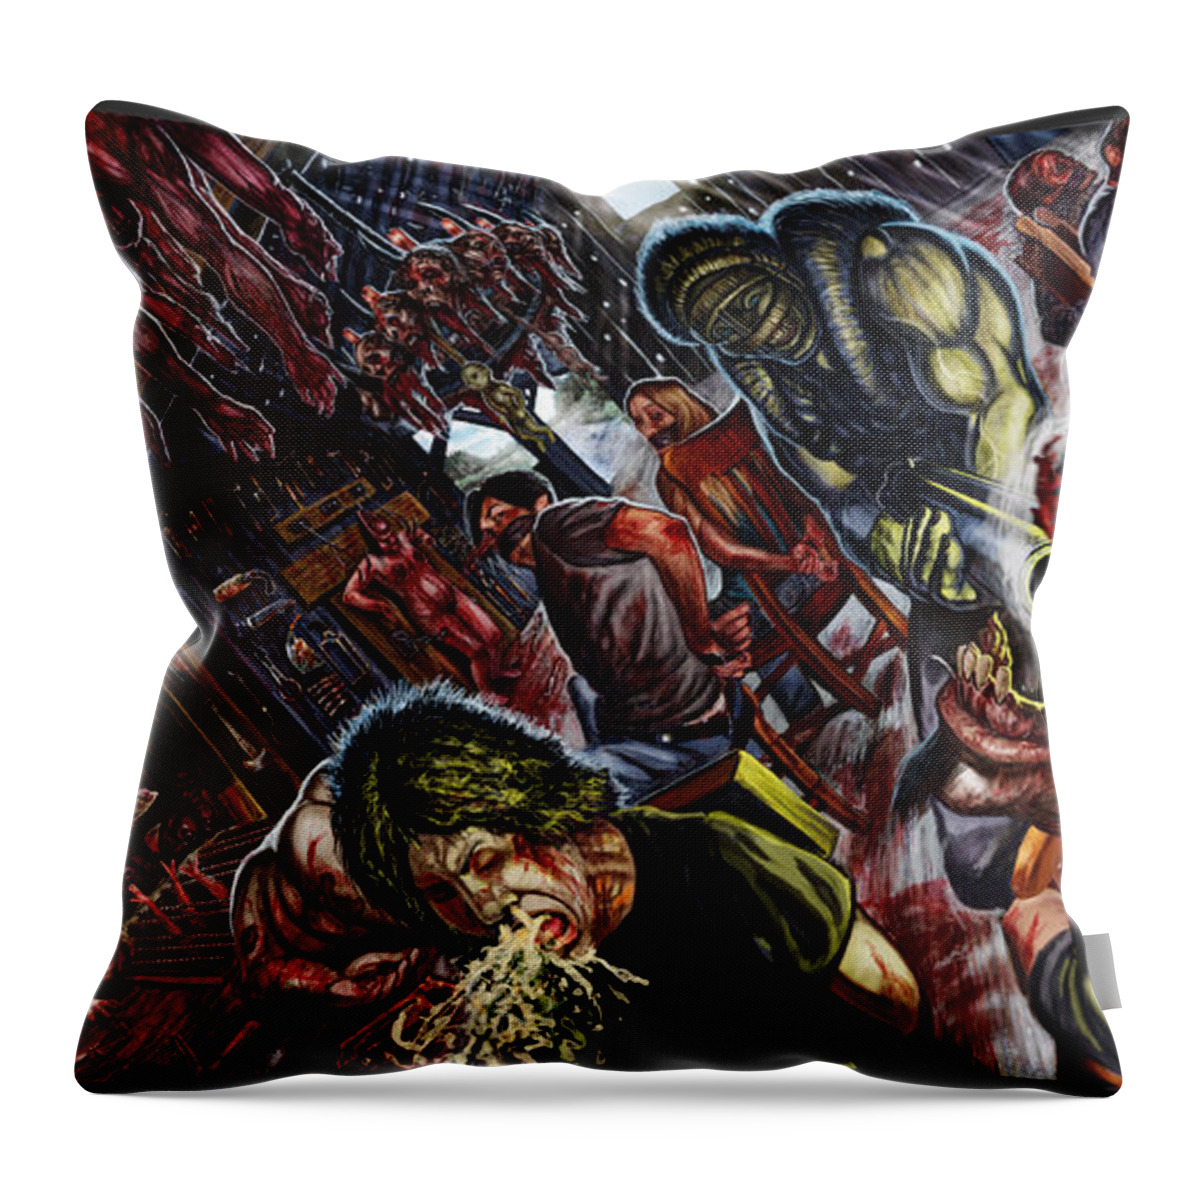 Waking The Cadaver Throw Pillow featuring the mixed media Because I Hate You by Tony Koehl